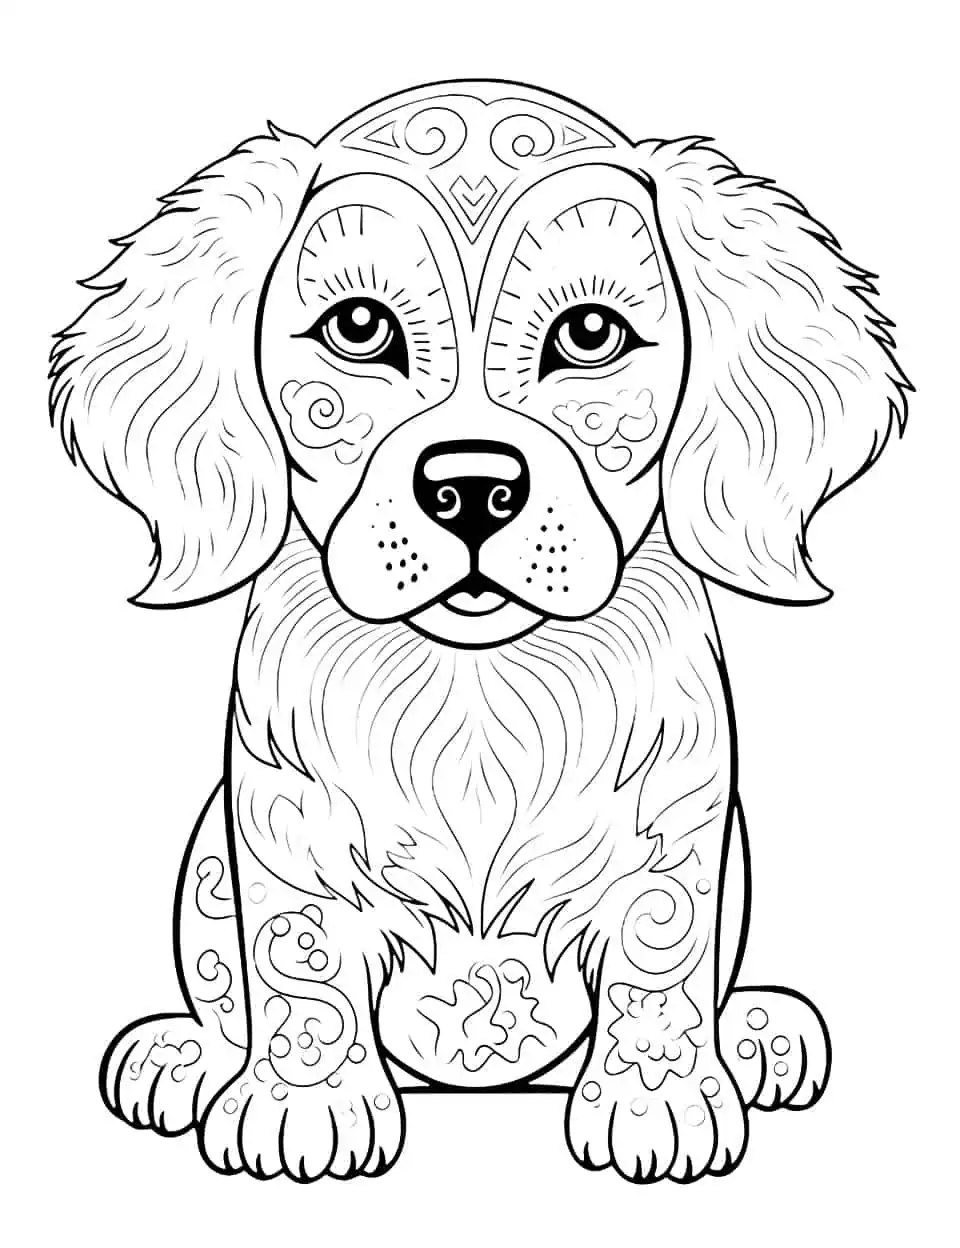 Golden Retriever and Mandala Dog Coloring Page - A beautiful Golden Retriever with a mandala pattern in the background.